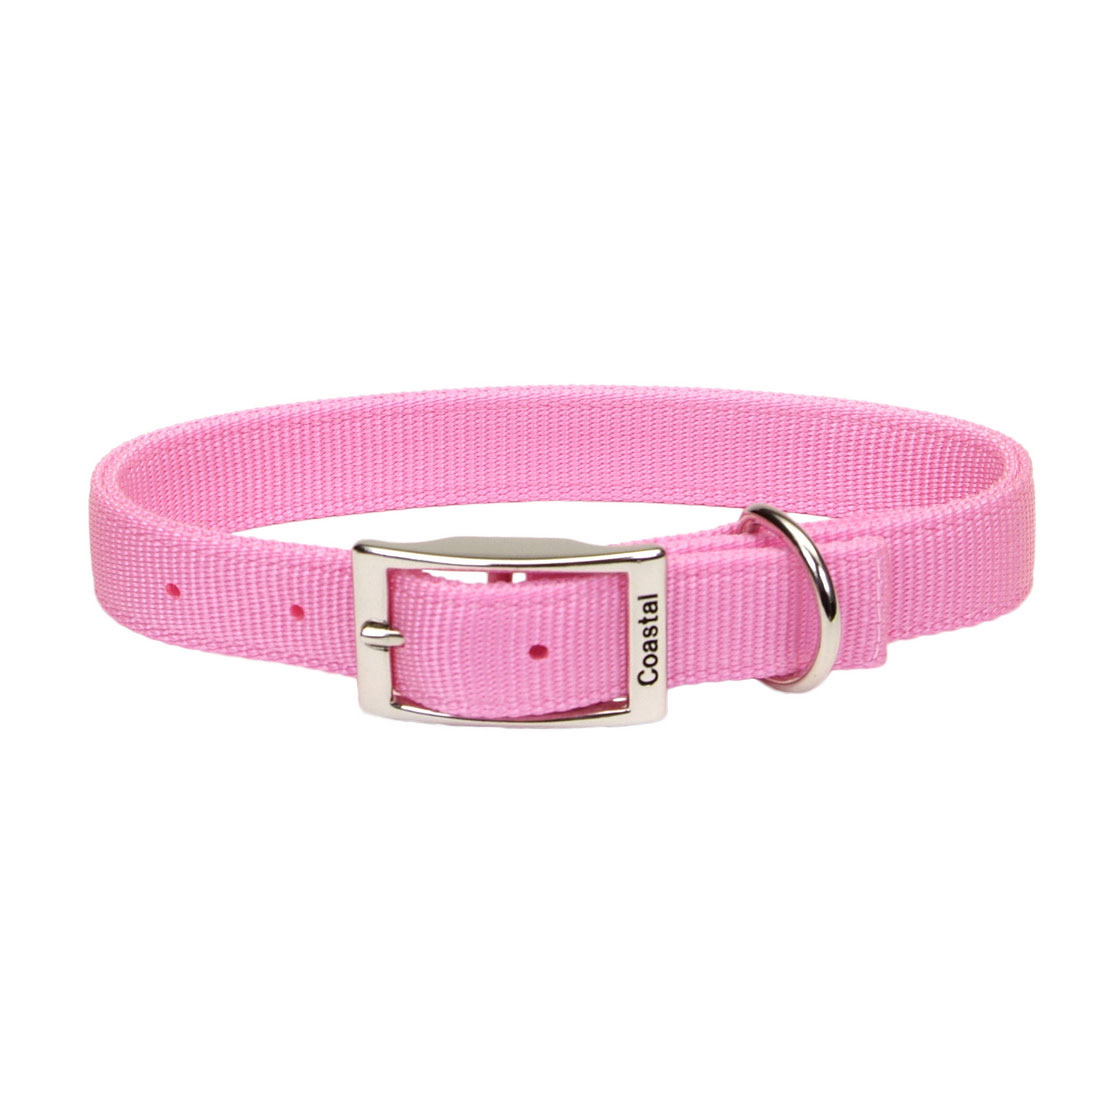 Coastal Pet Products 1" Adjustable Double-Ply Dog Collar w/Metal Buckle (20") - Pink